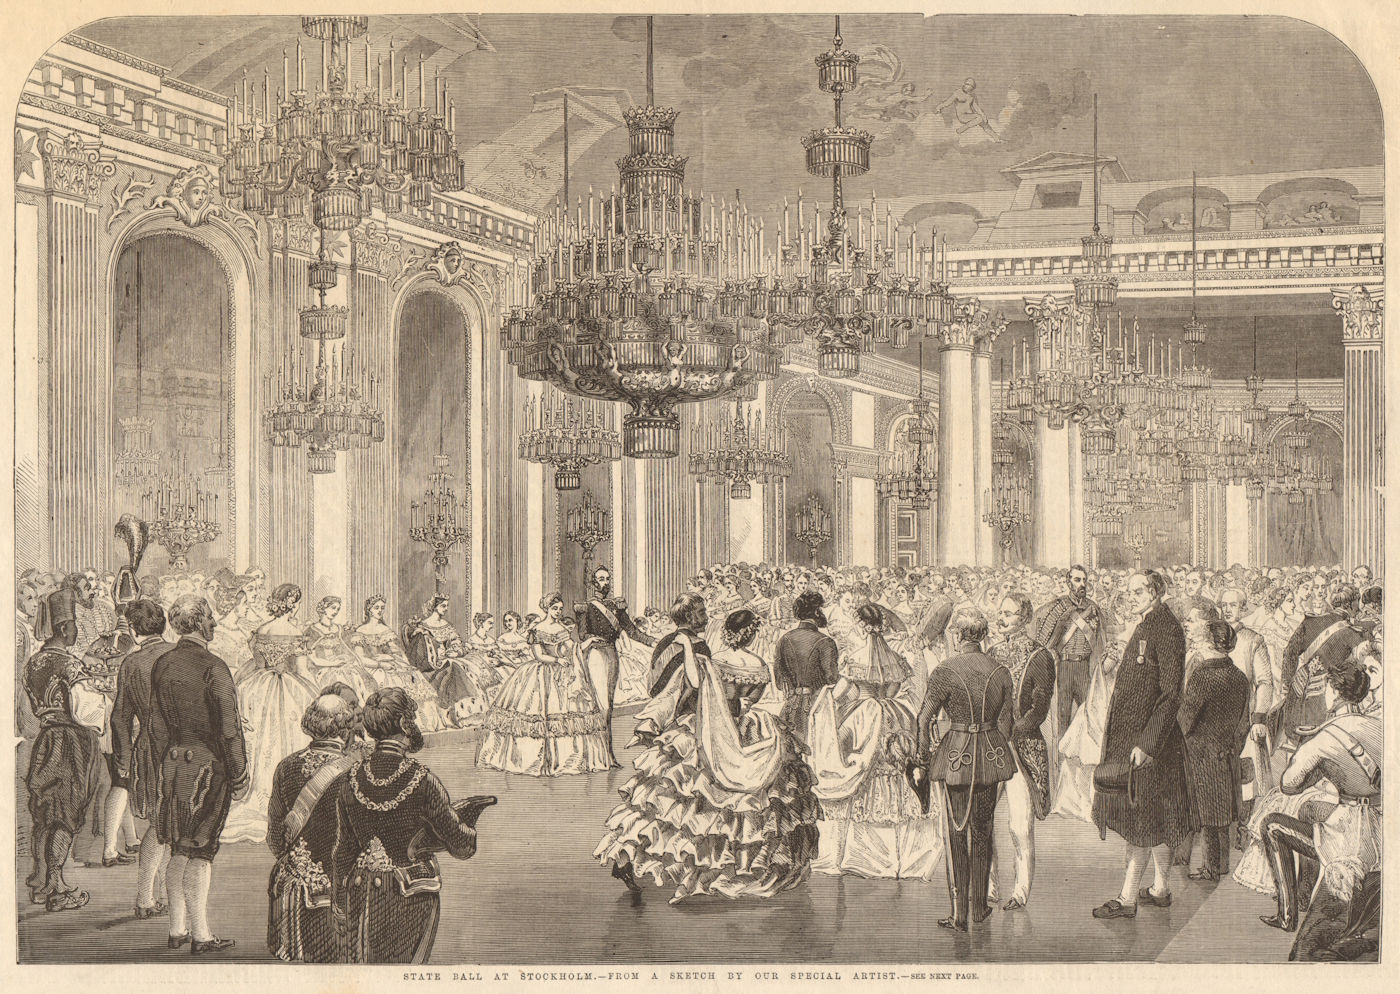 Associate Product State ball at Stockholm. Sweden. Society 1860 antique ILN full page print